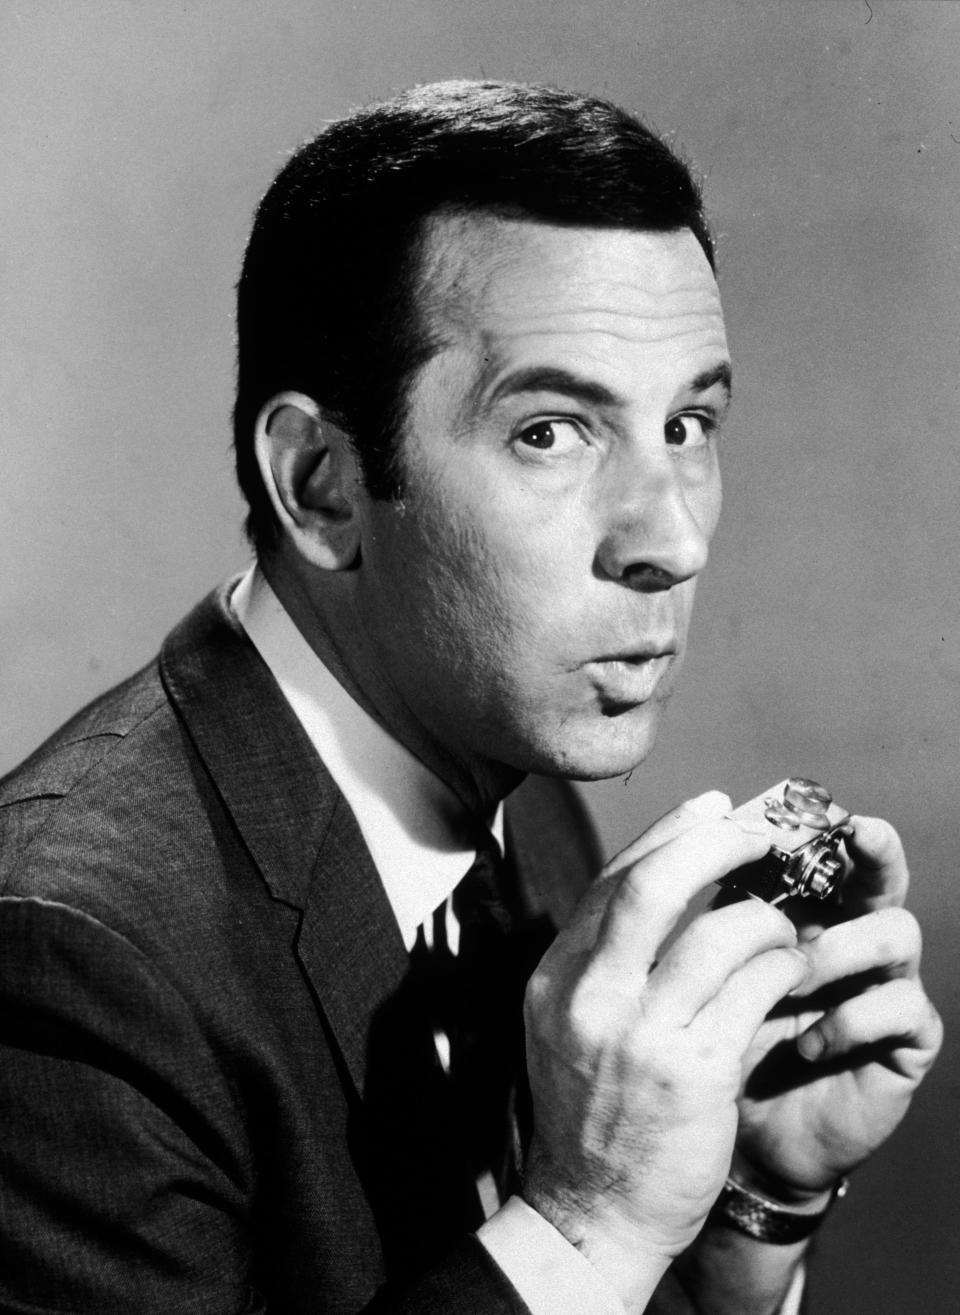 Portrait of American actor Don Adams, best known for his role as Maxwell Smart on the television series, 'Get Smart' (1965 - 1970), mugging while holding a miniature spy camera.